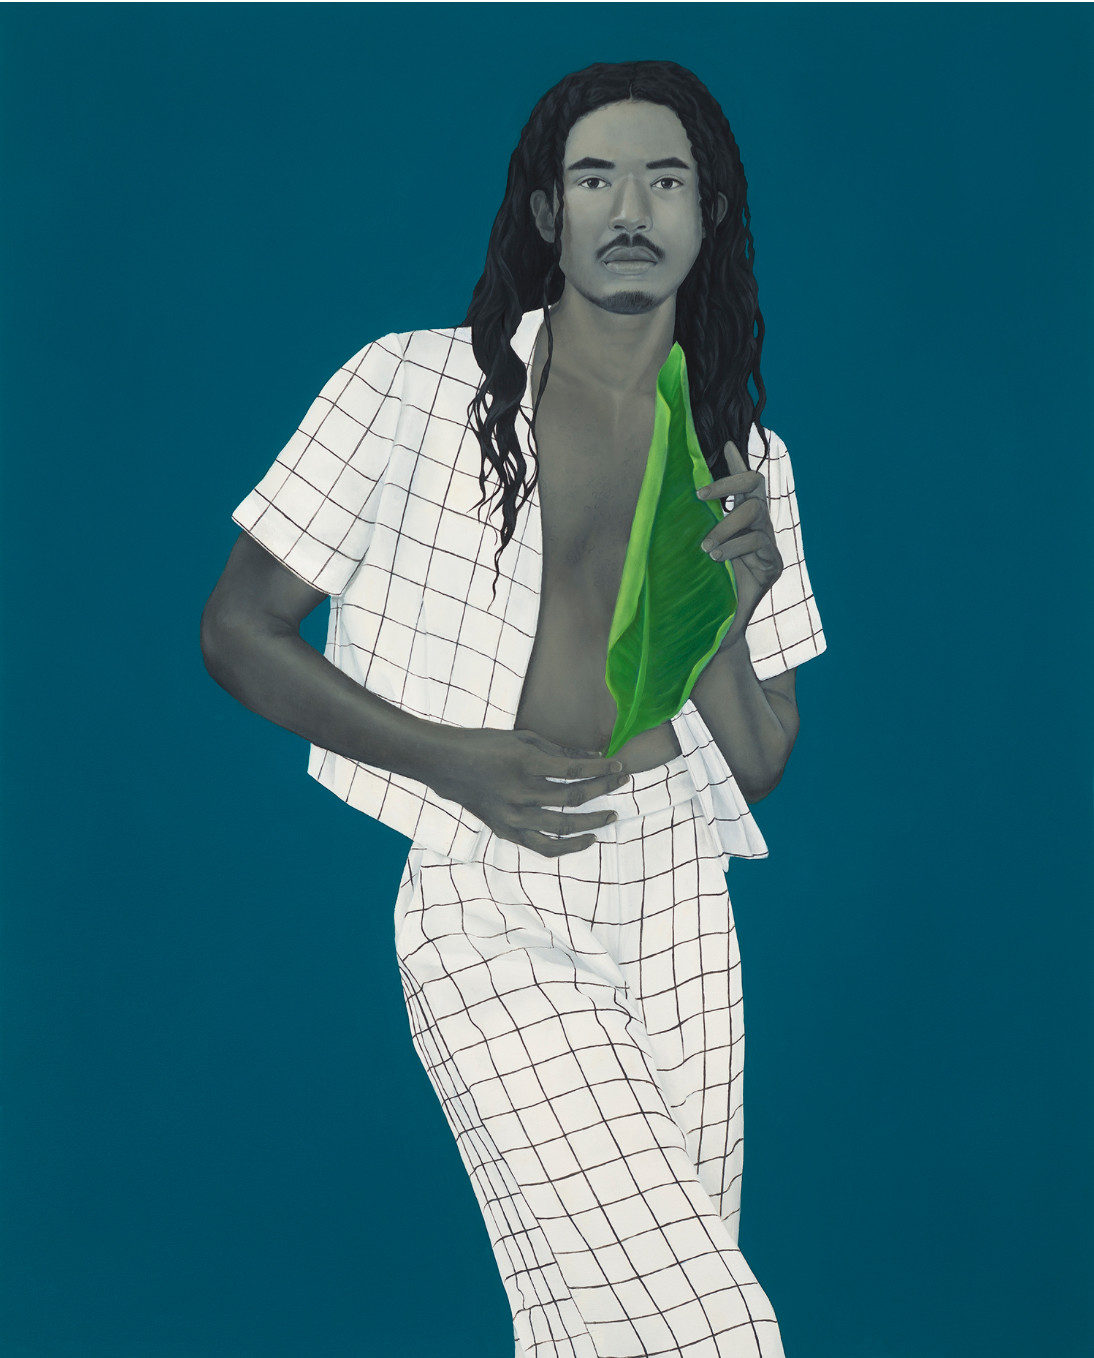 Amy Sherald, The lesson of falling leaves 2017, Oil on canvas 54 × 43 in. (137.16 × 109.22 cm) The Museum of Contemporary Art, Los Angeles Purchase with funds provided by the Acquisition and Collection Committee